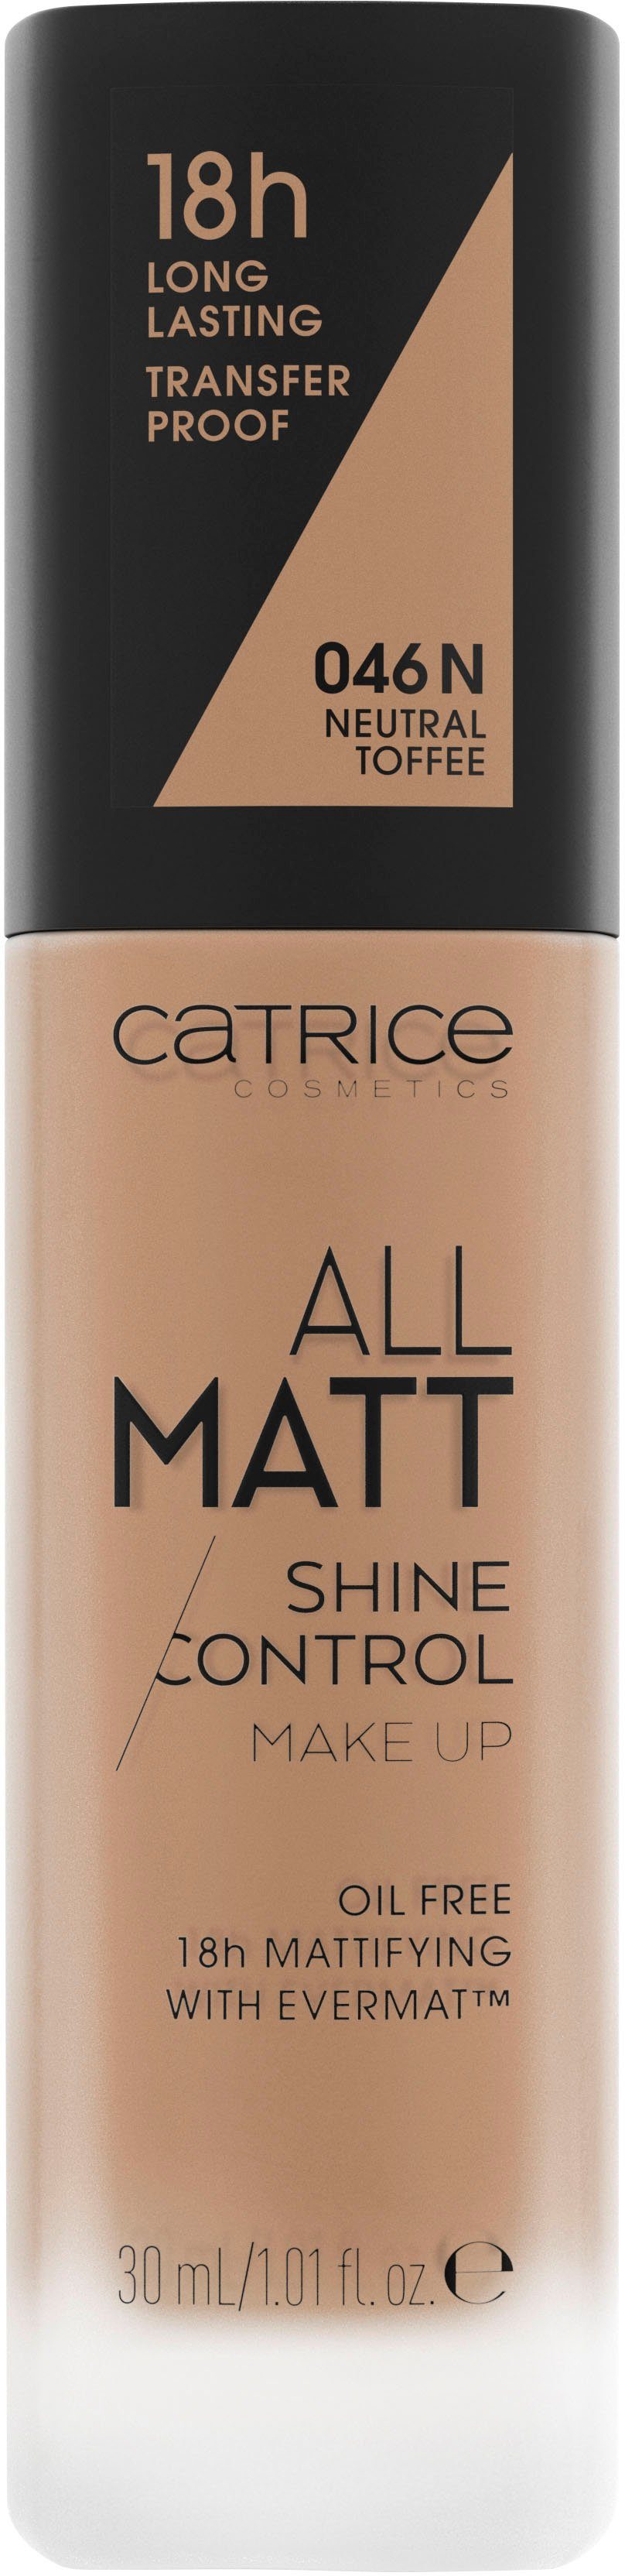 Shine Toffee Neutral Up Matt Catrice Control Foundation Make All